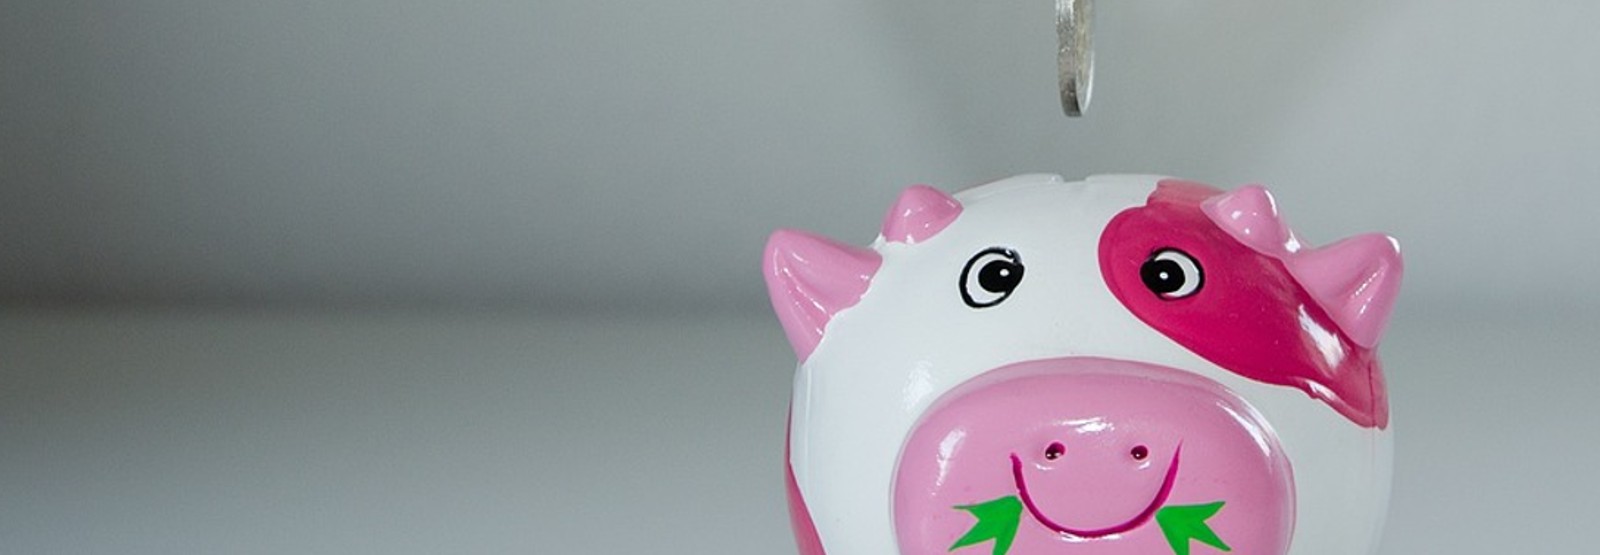 pink cow piggy bank that is smiling when someone puts money in him